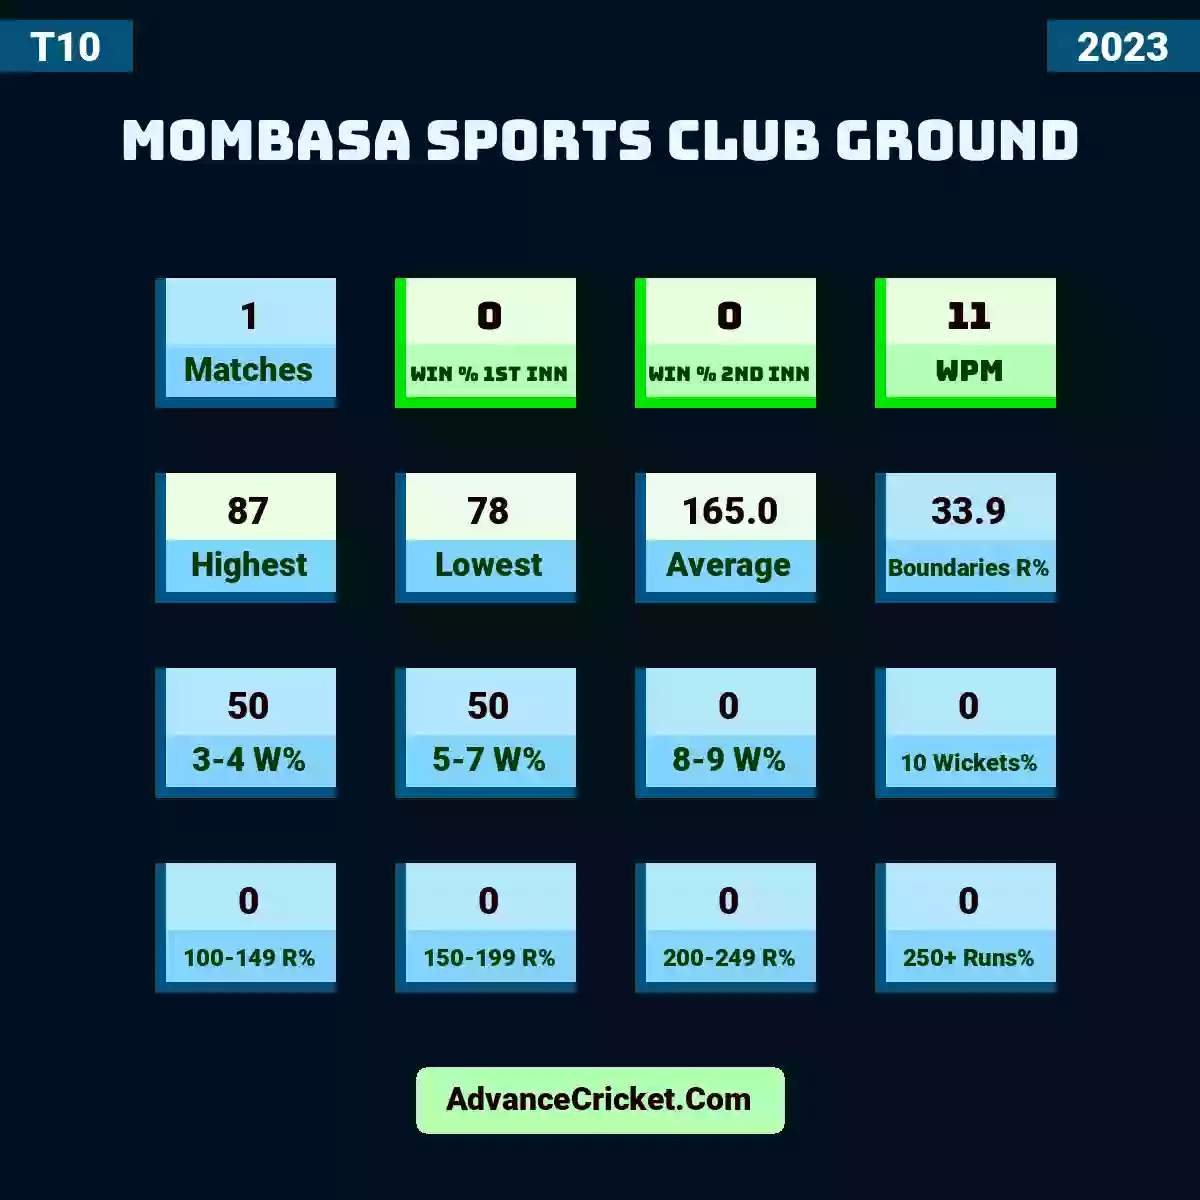 Image showing Mombasa Sports Club Ground with Matches: 1, Win % 1st Inn: 0, Win % 2nd Inn: 0, WPM: 11, Highest: 87, Lowest: 78, Average: 165.0, Boundaries R%: 33.9, 3-4 W%: 50, 5-7 W%: 50, 8-9 W%: 0, 10 Wickets%: 0, 100-149 R%: 0, 150-199 R%: 0, 200-249 R%: 0, 250+ Runs%: 0.